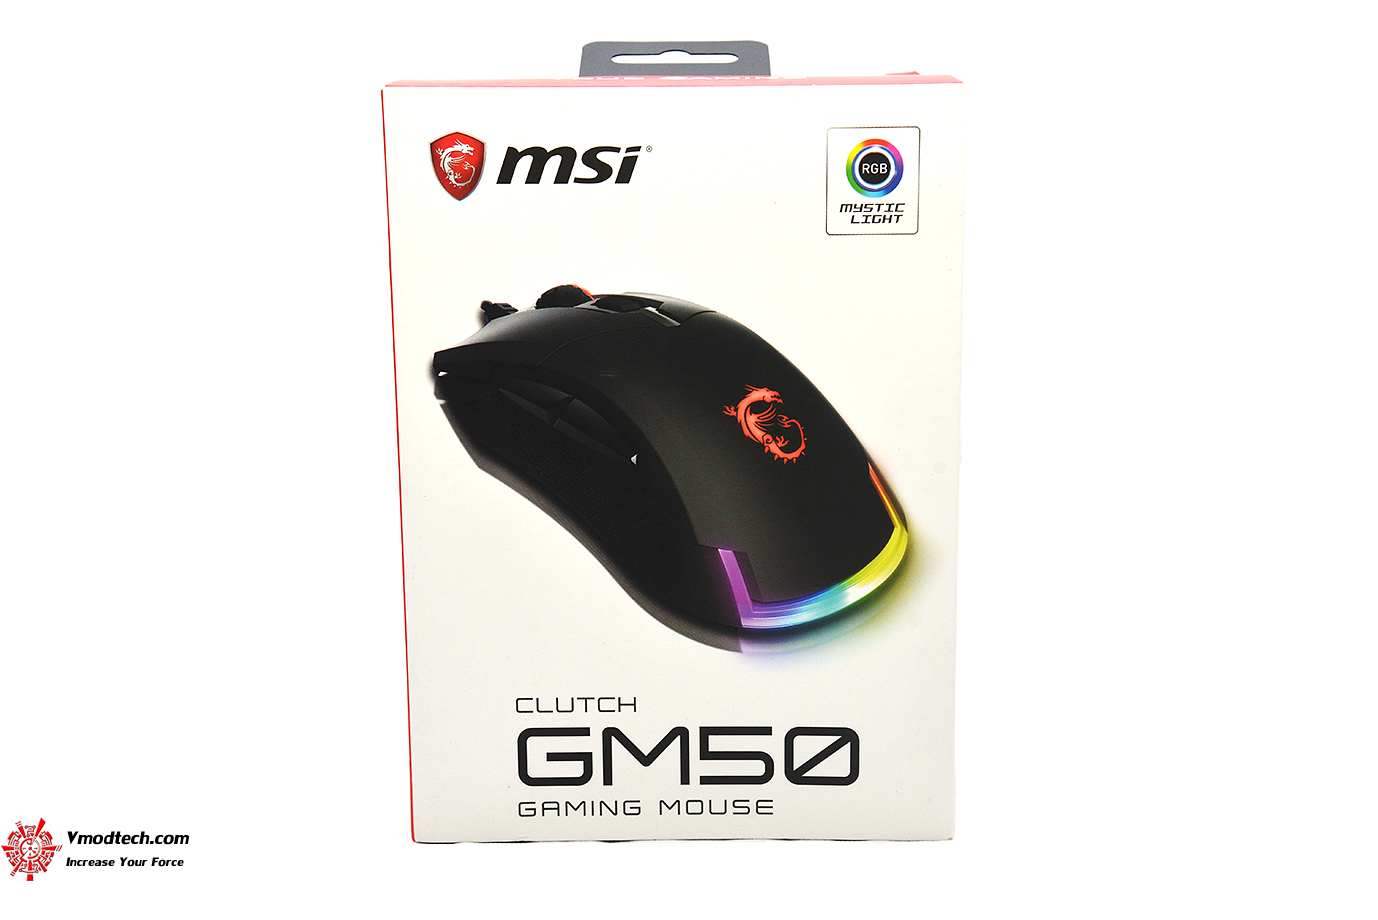 dsc 4878 MSI CLUTCH GM50 GAMING MOUSE REVIEW